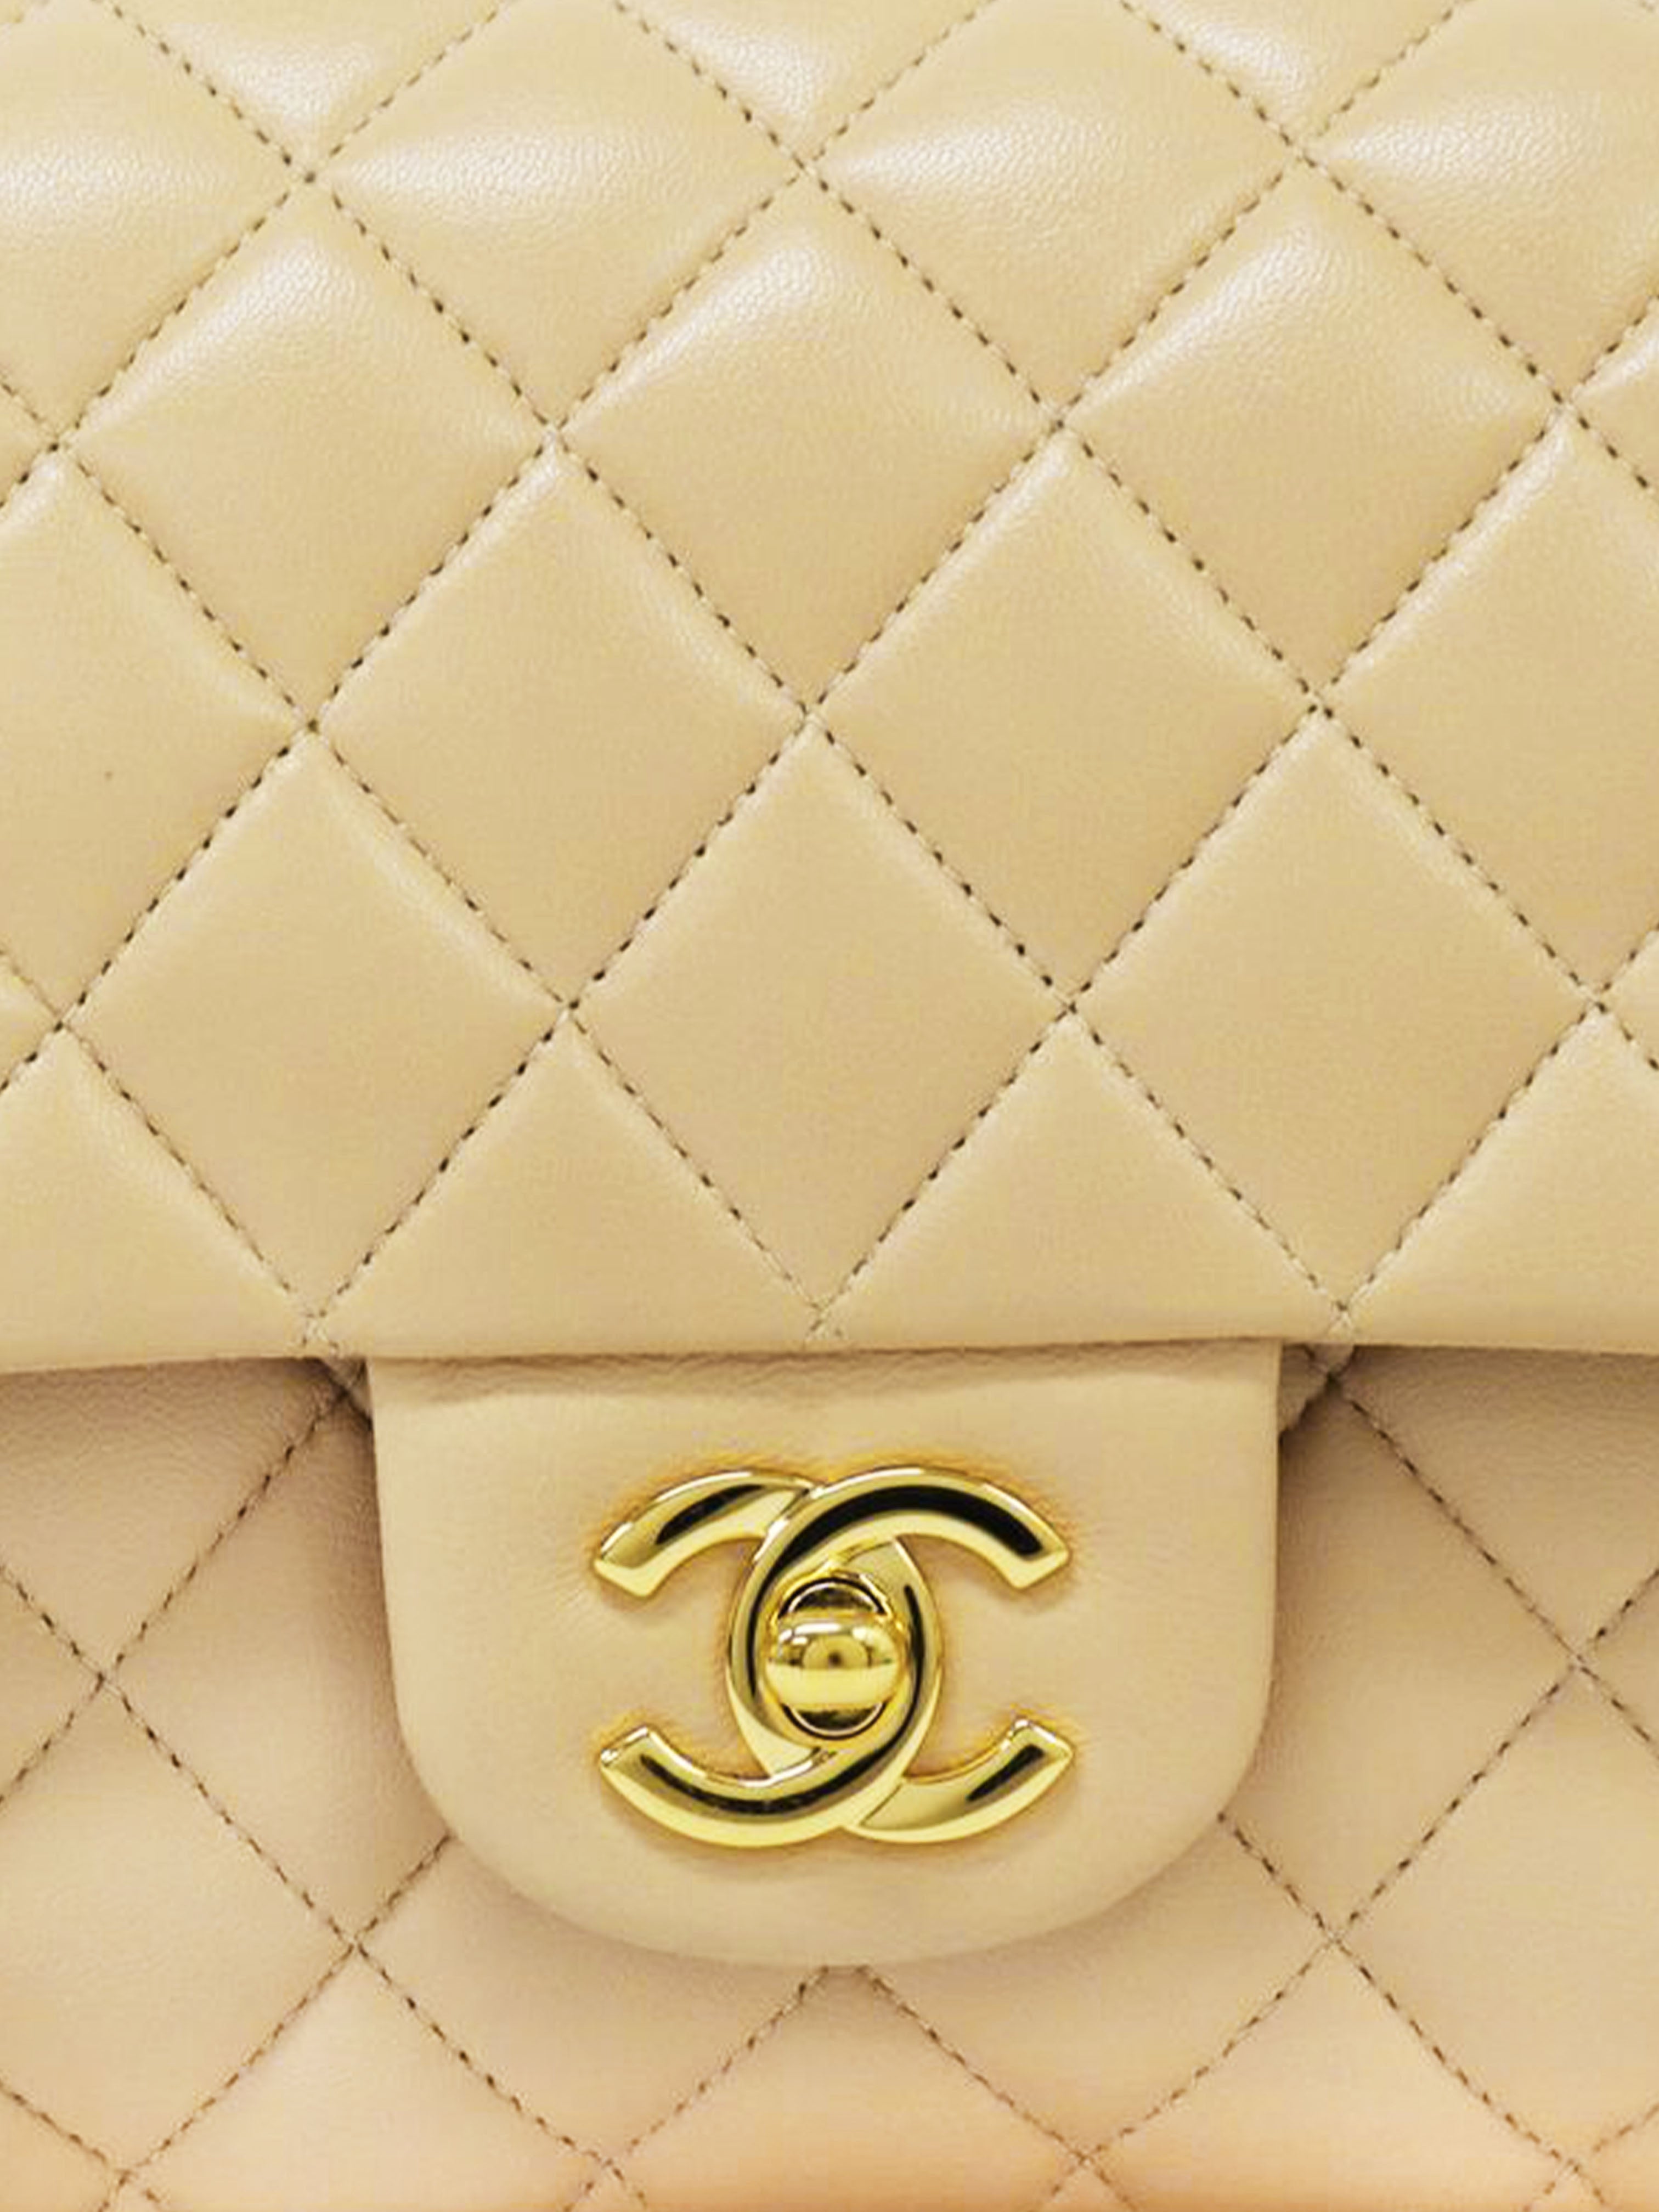 CHANEL Lambskin Quilted Small Double Flap Bag  Chanel classic flap pink,  Double flap, Chanel classic flap